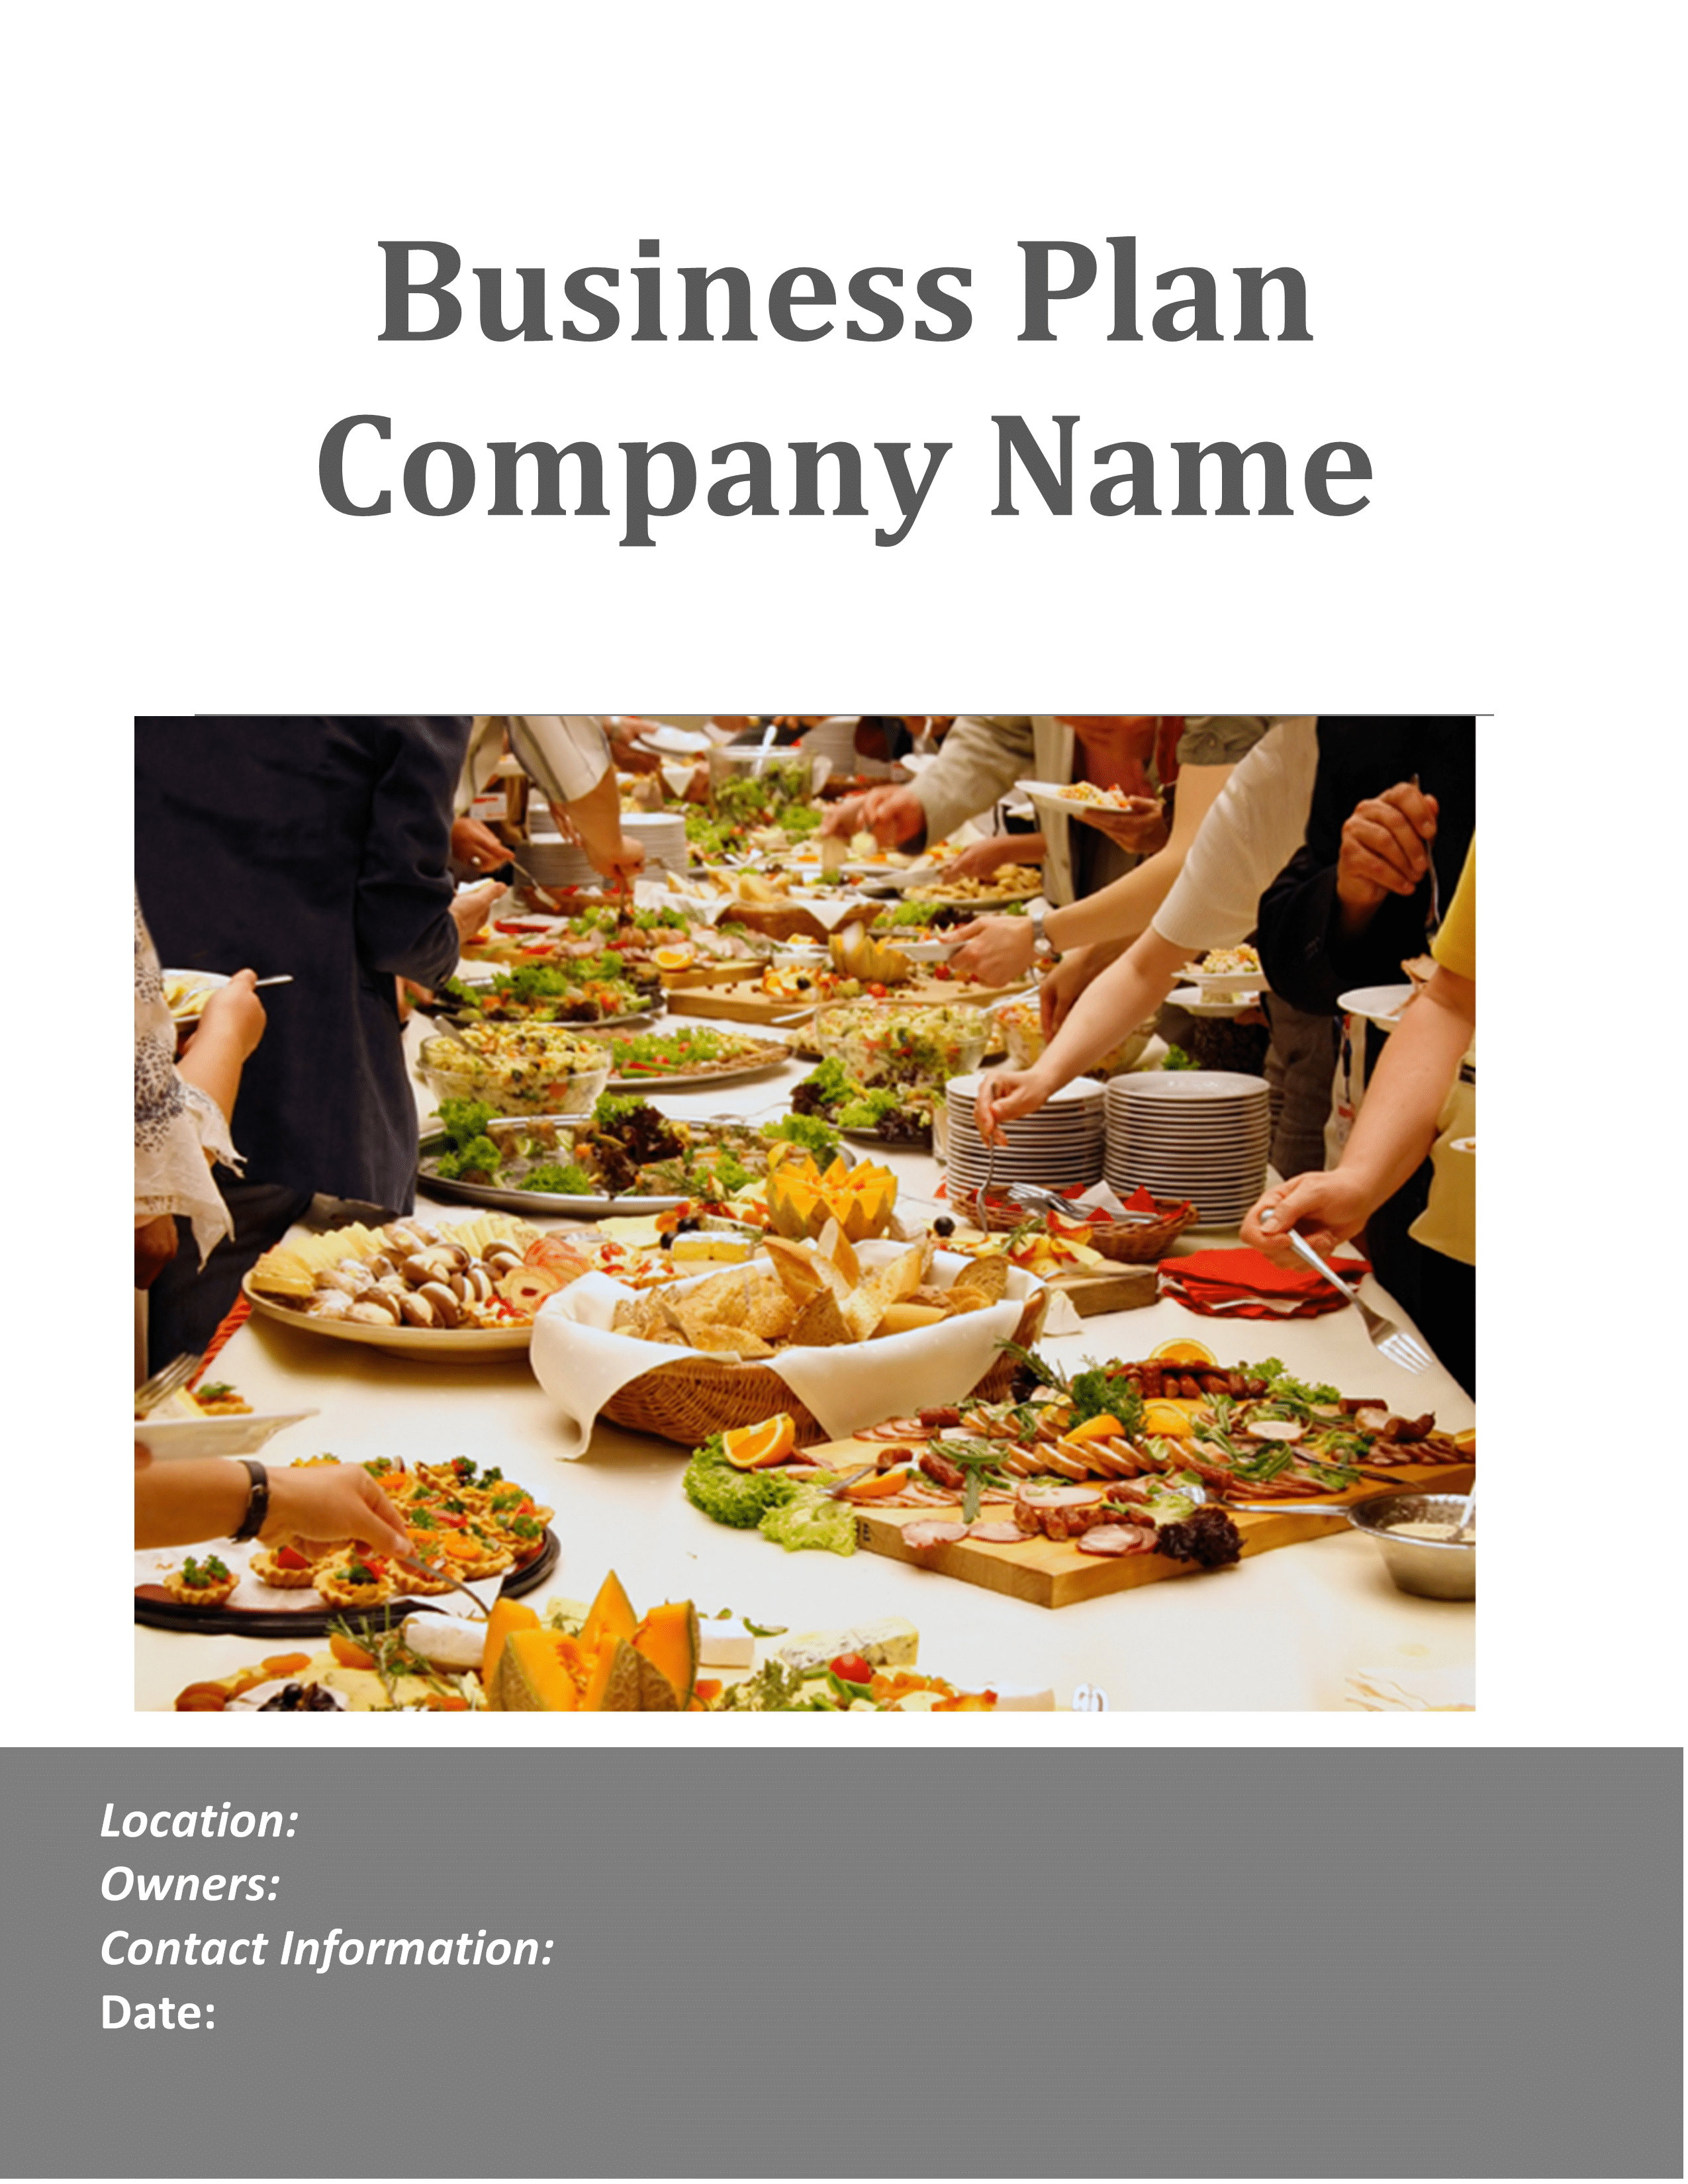 titles of business plan in food and beverage